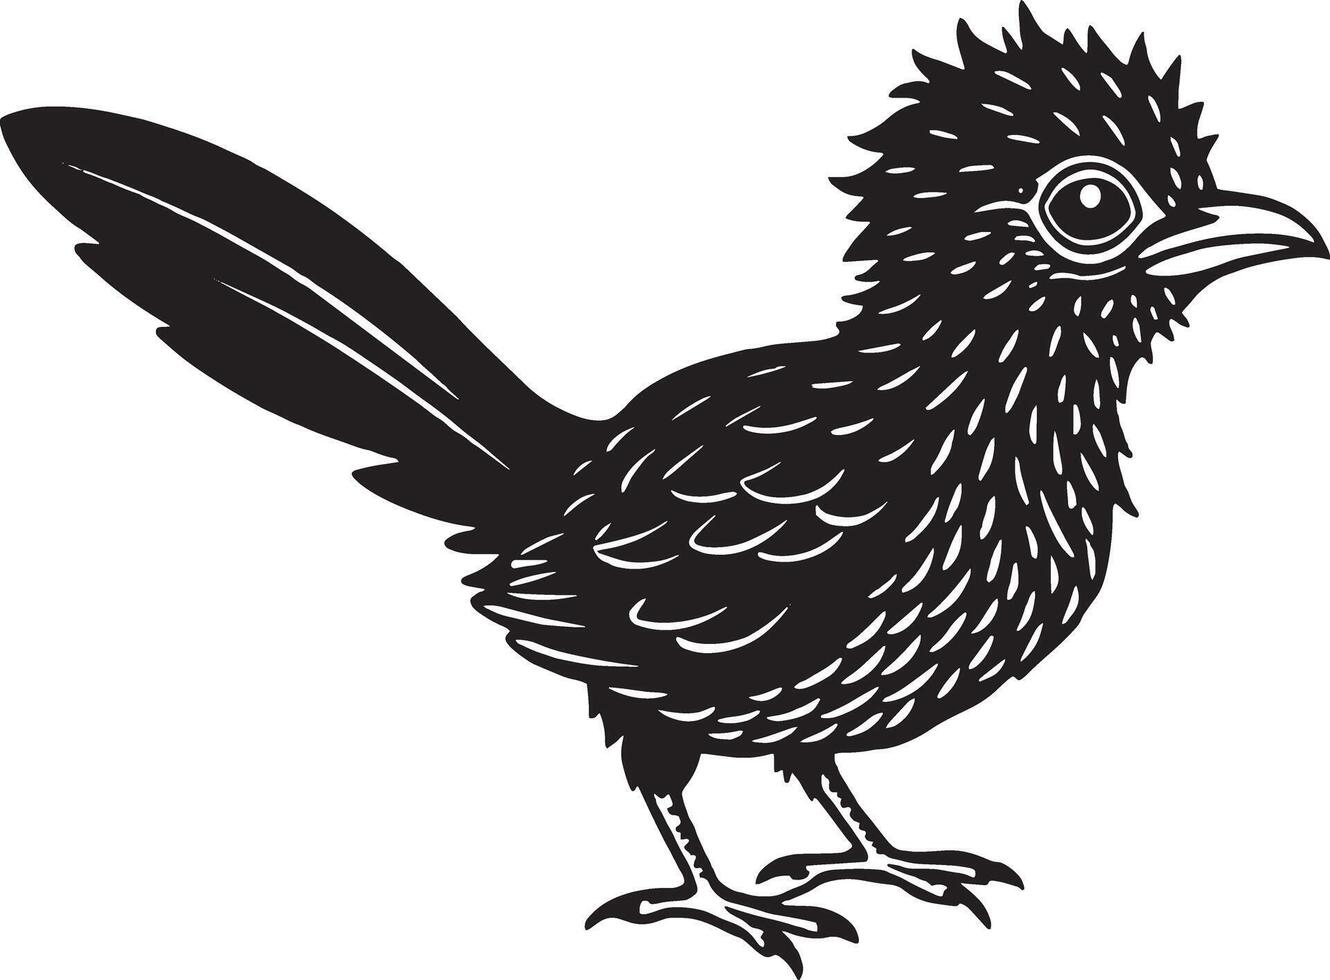 image of a bird on a white background. Black and white. vector